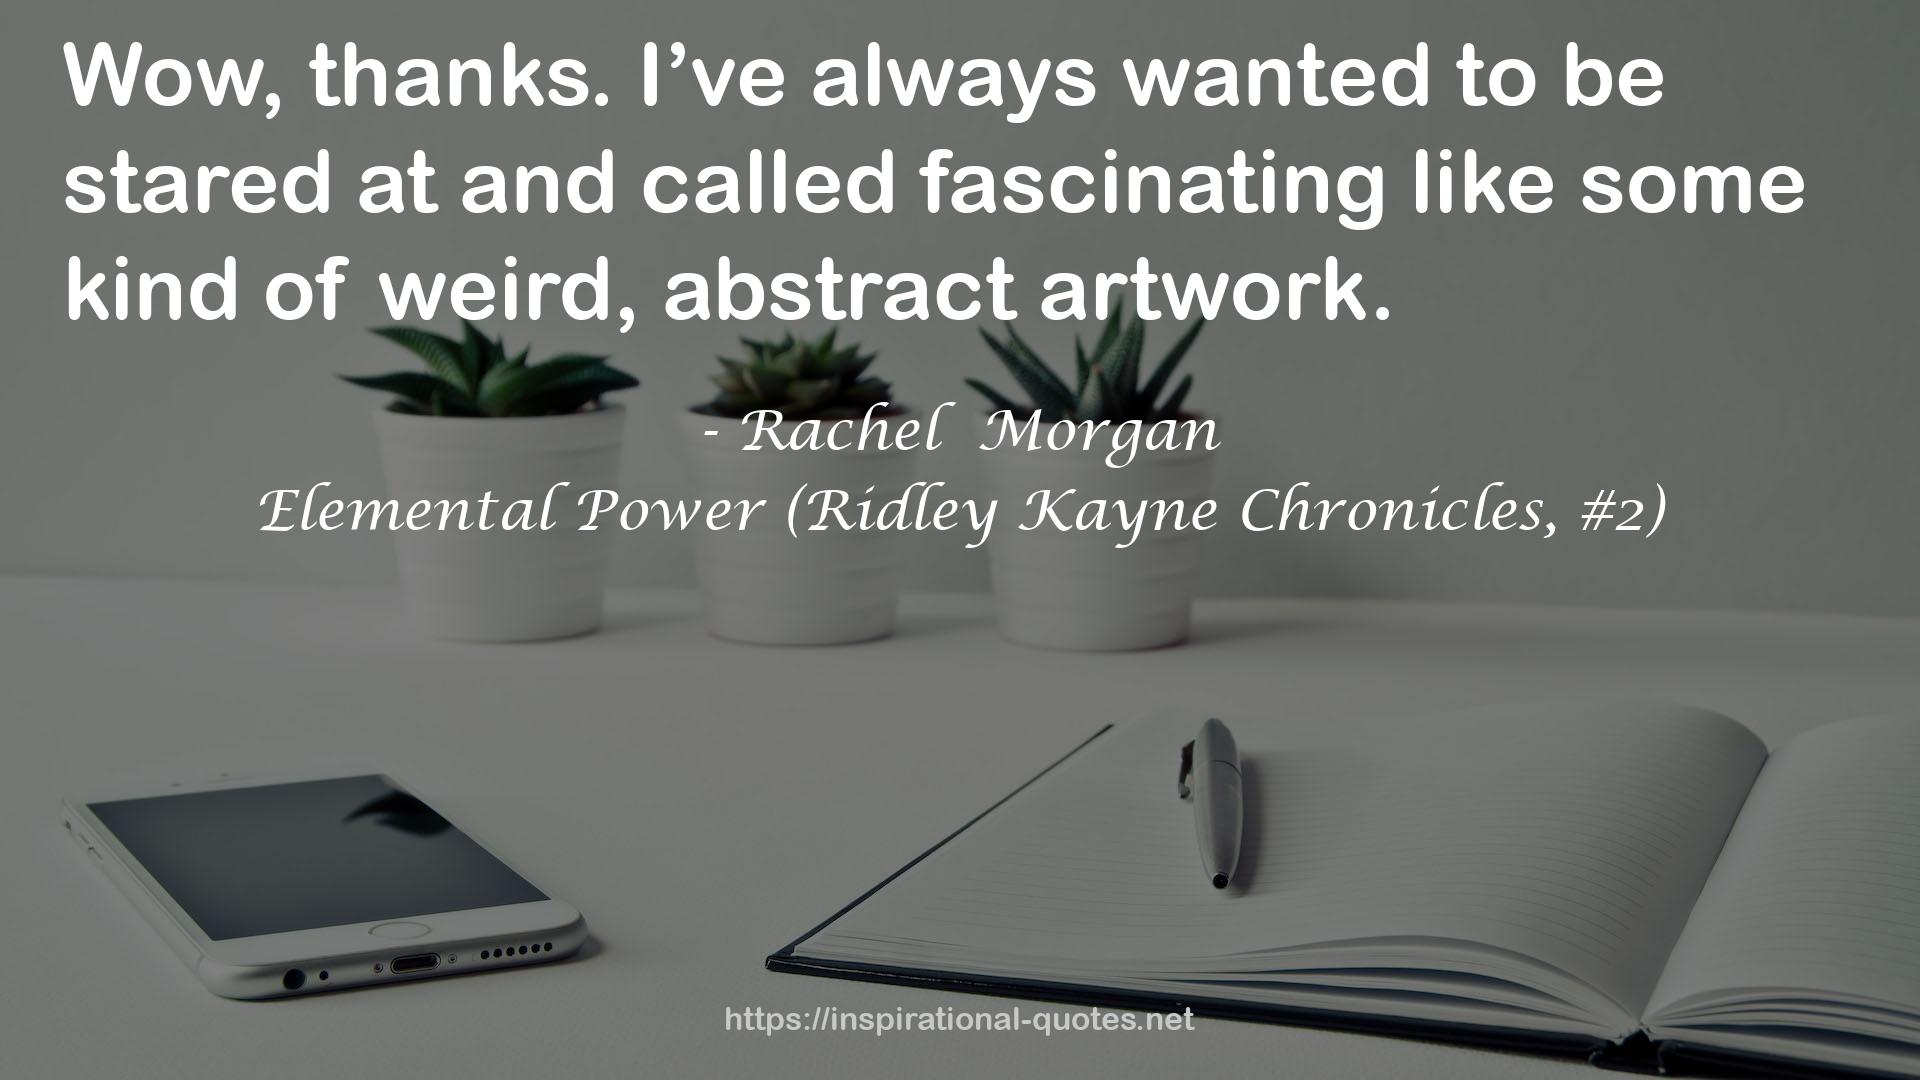 Elemental Power (Ridley Kayne Chronicles, #2) QUOTES